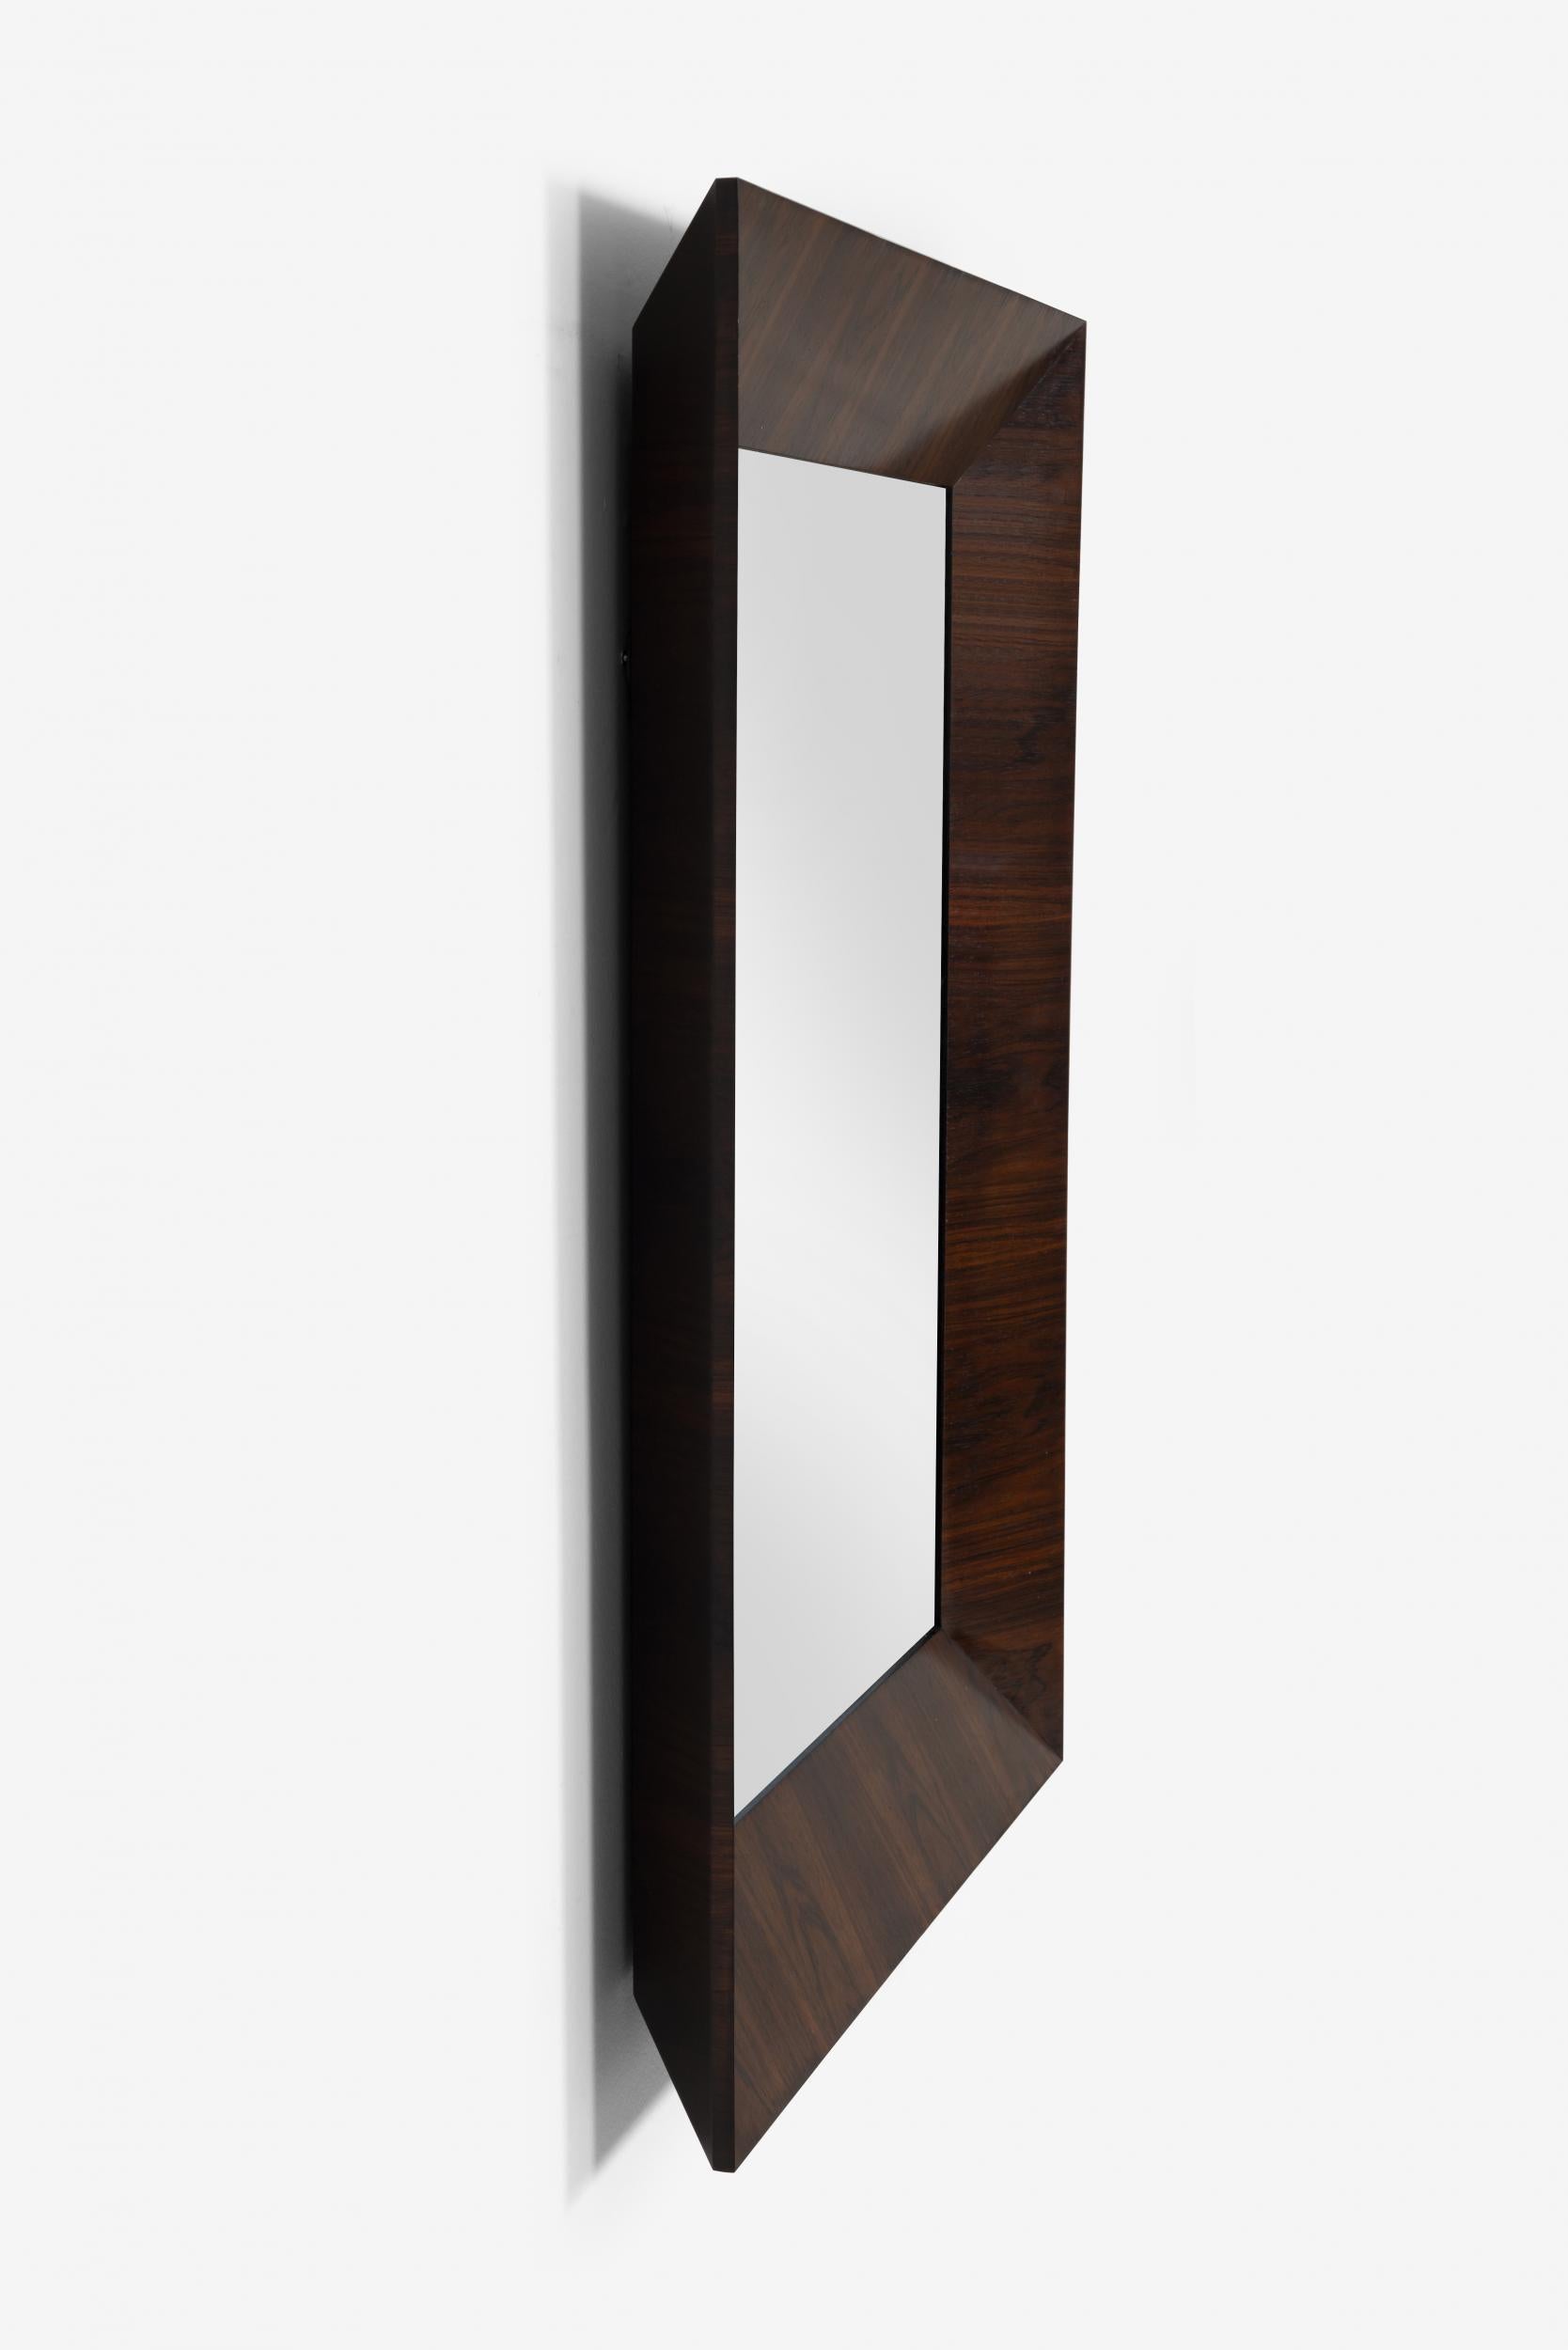 Lacquered Edward Wormley Rosewood Mirror